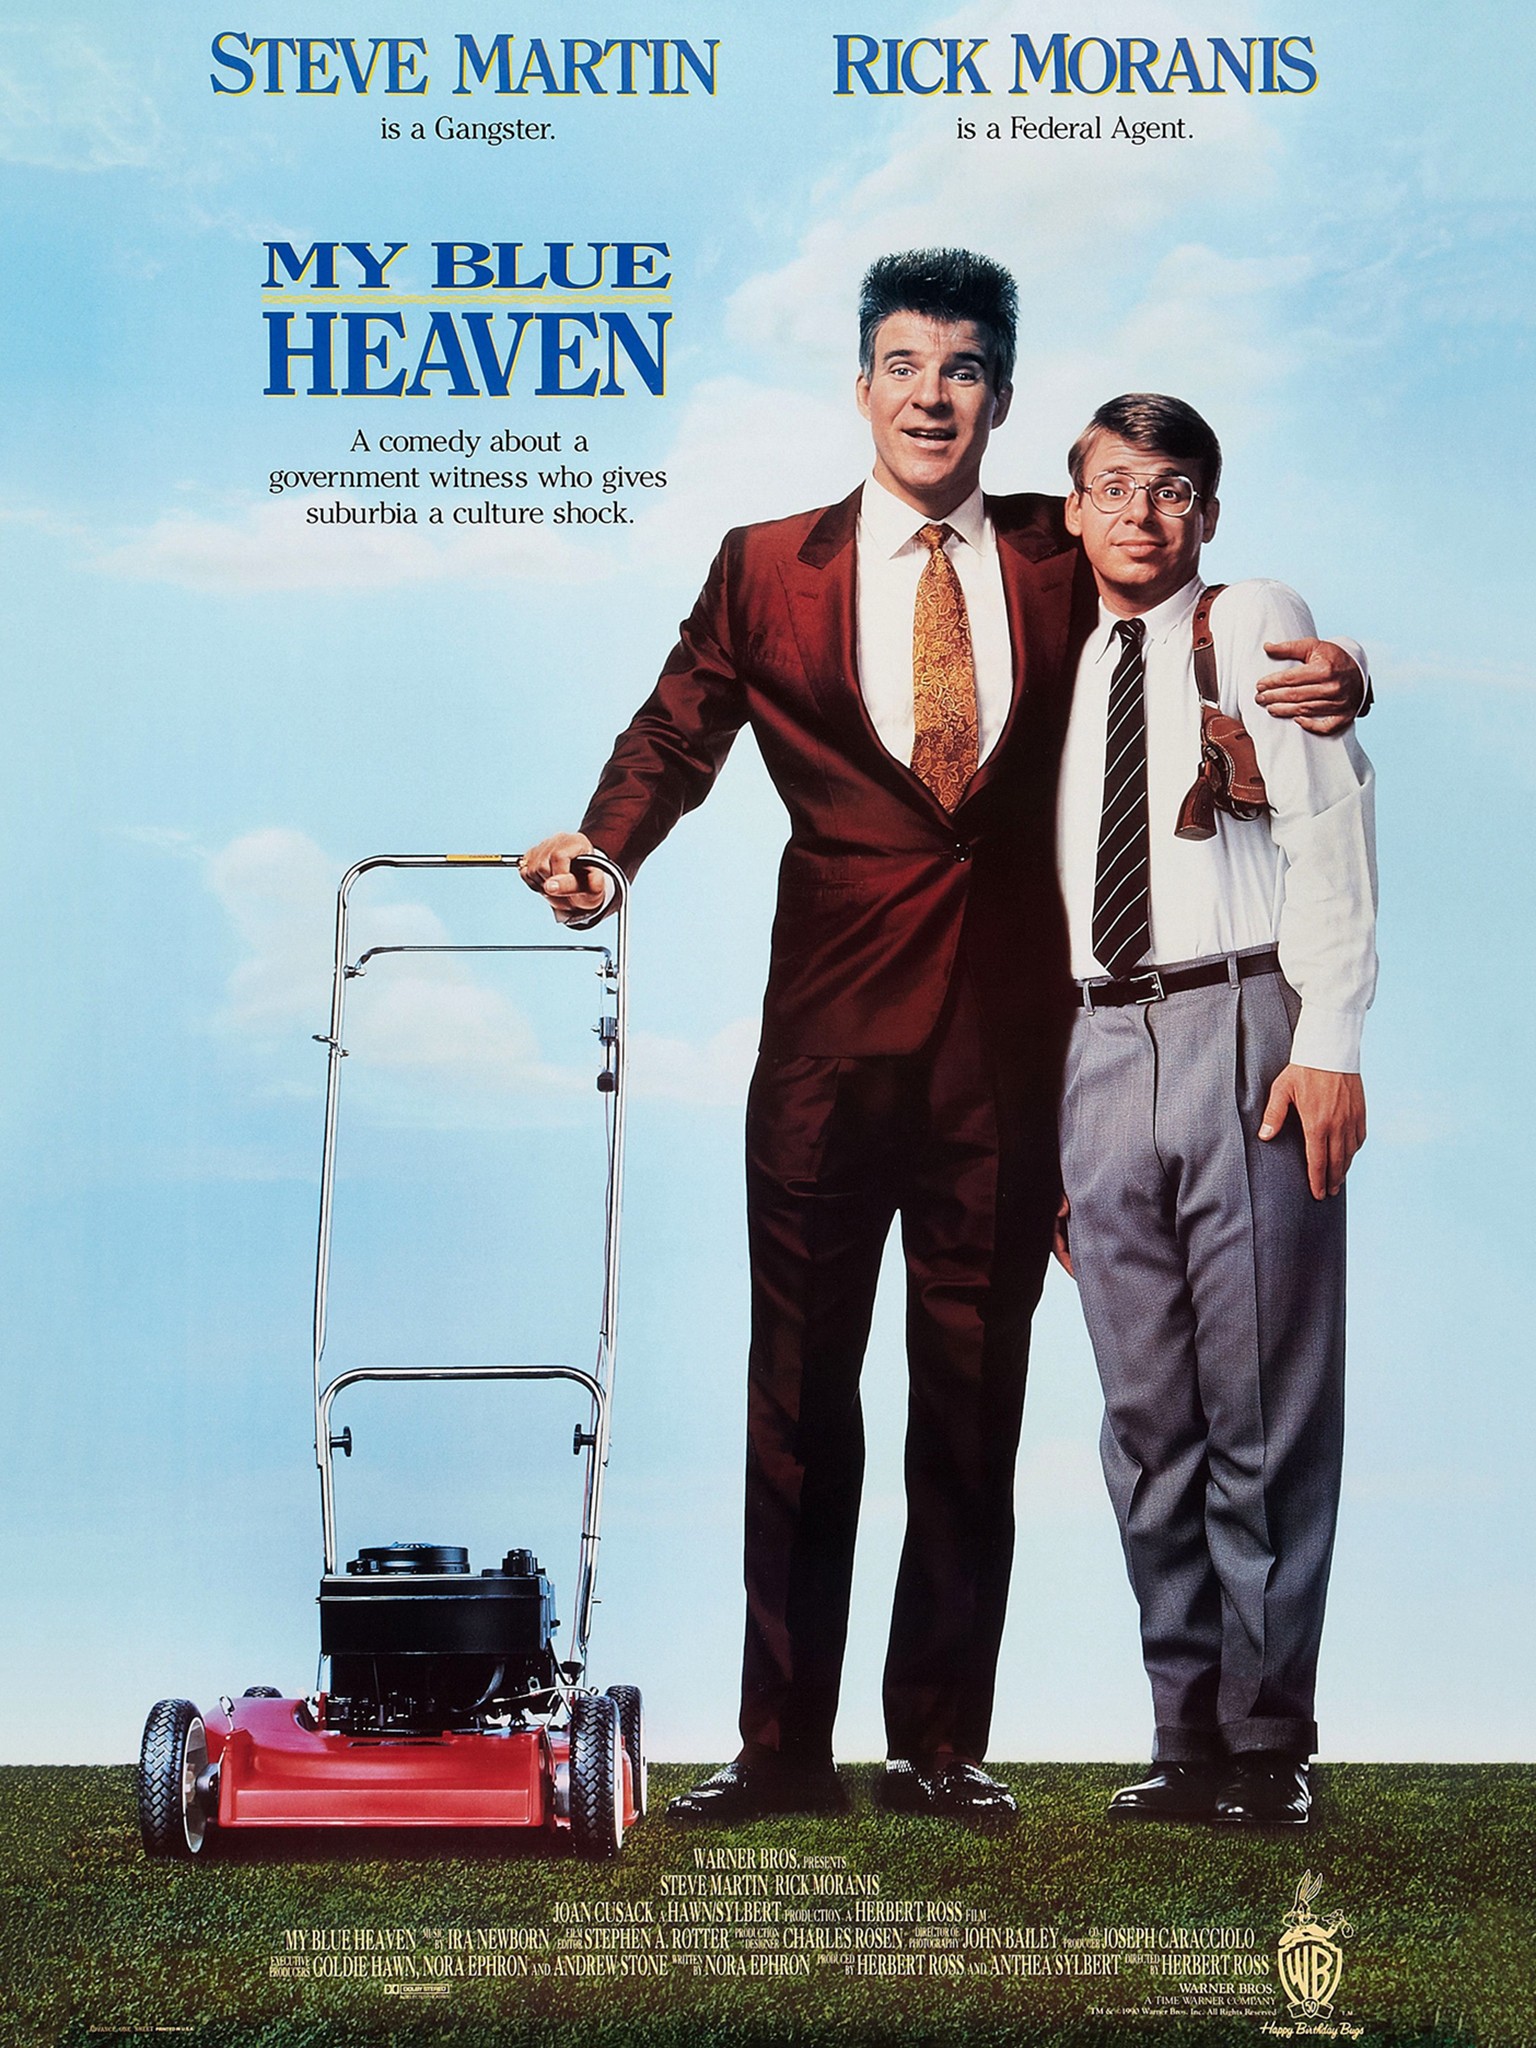 One Step from Heaven - streaming tv show online